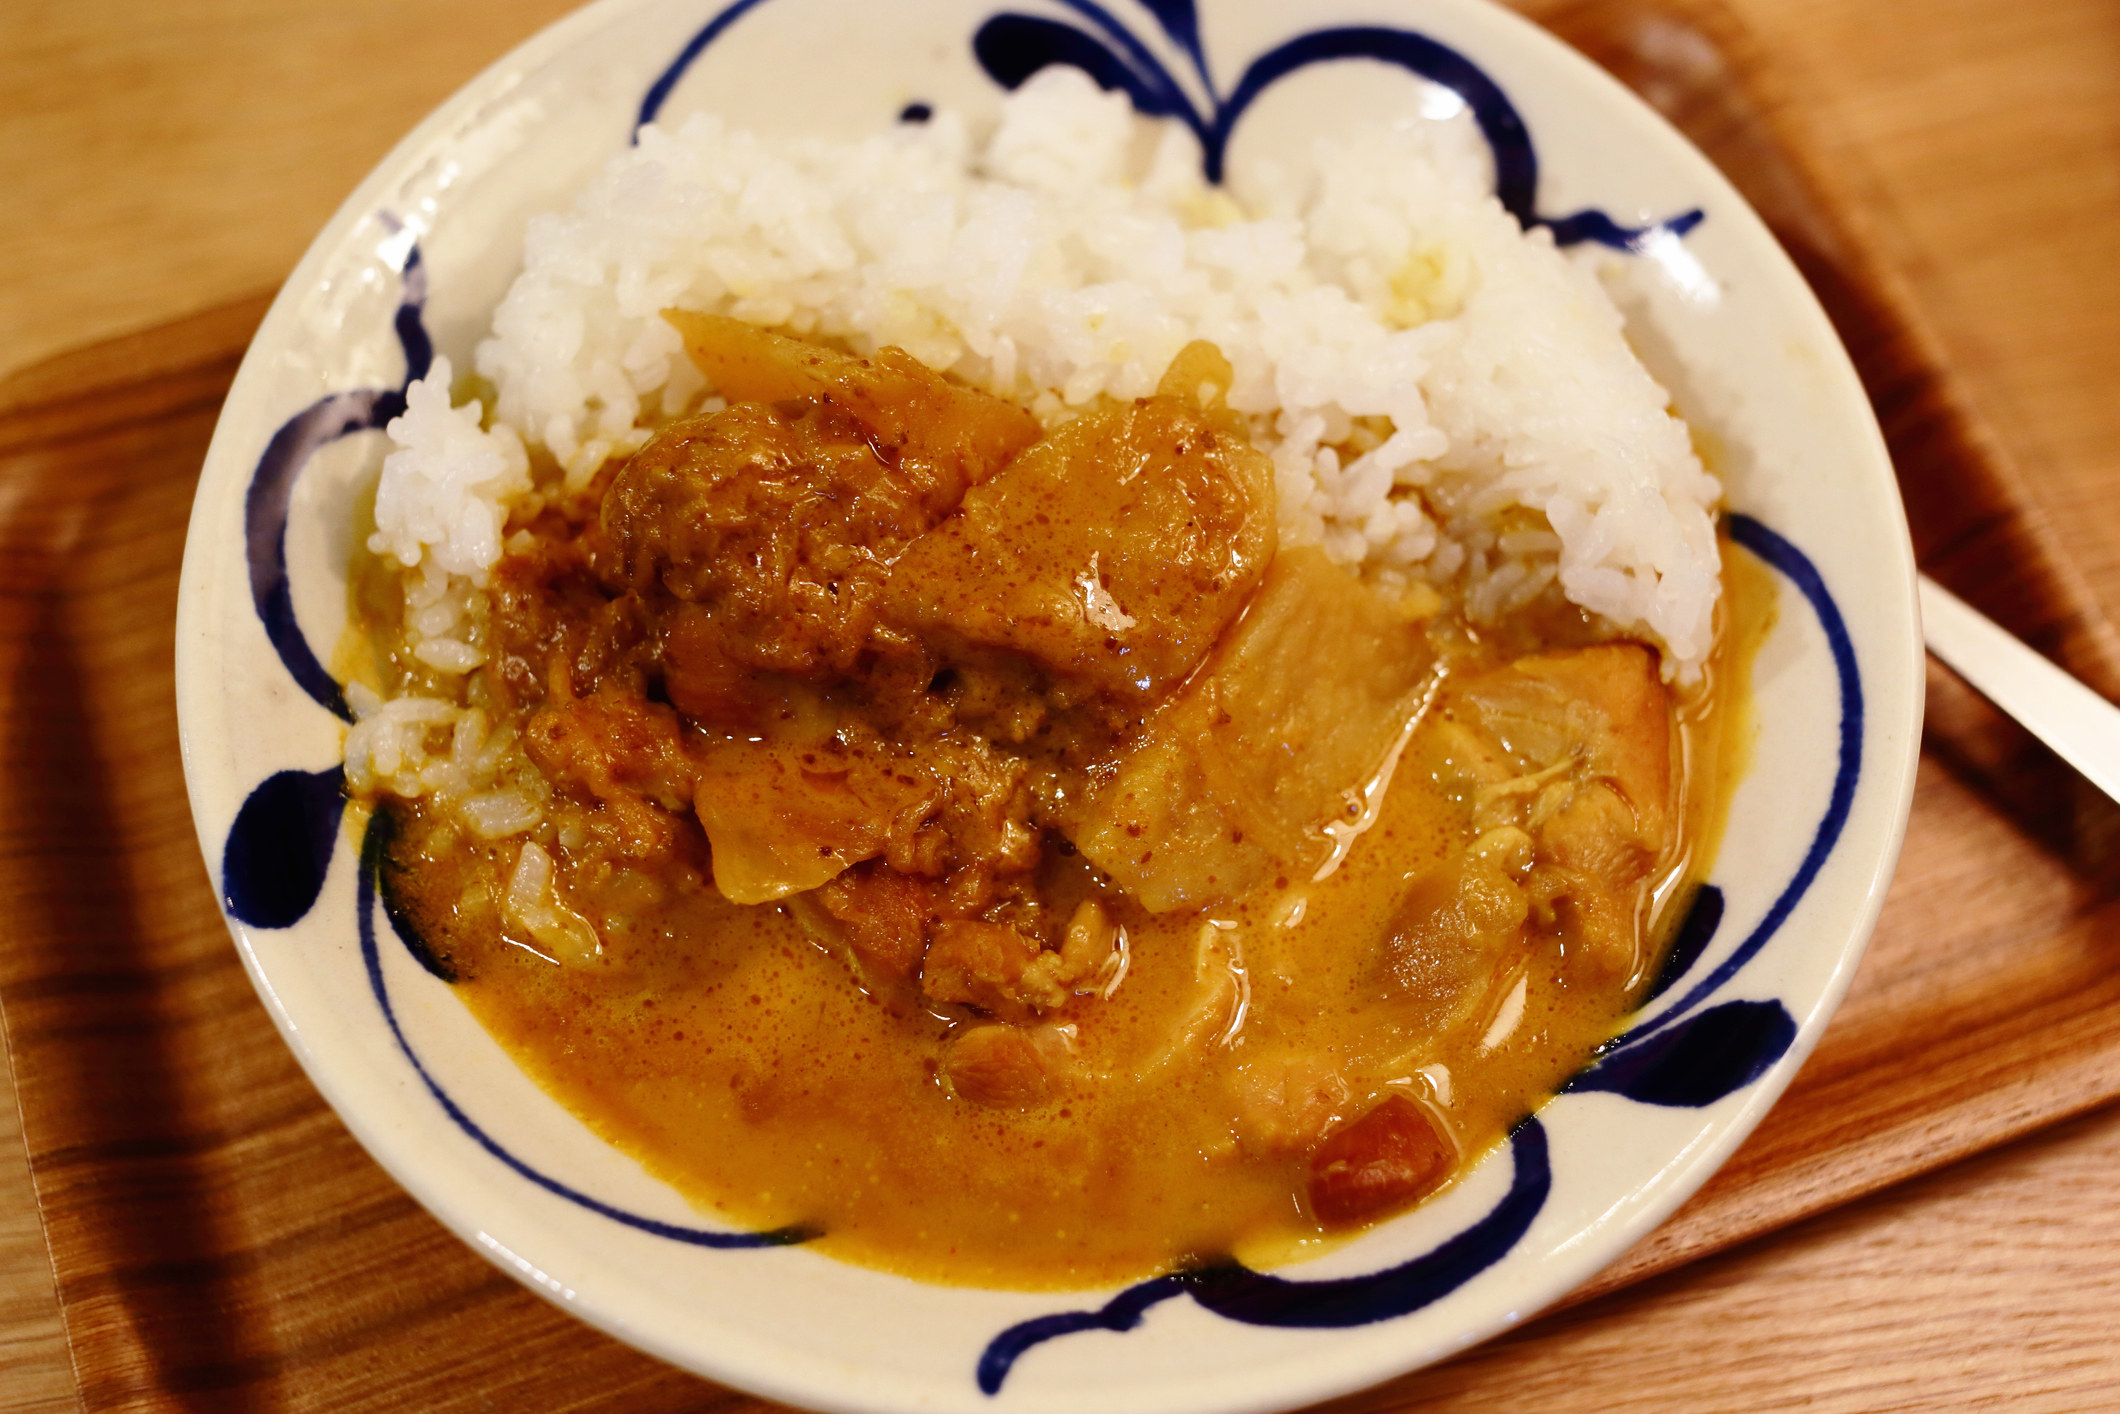 A close-up of Japanese curry and rice on a plate